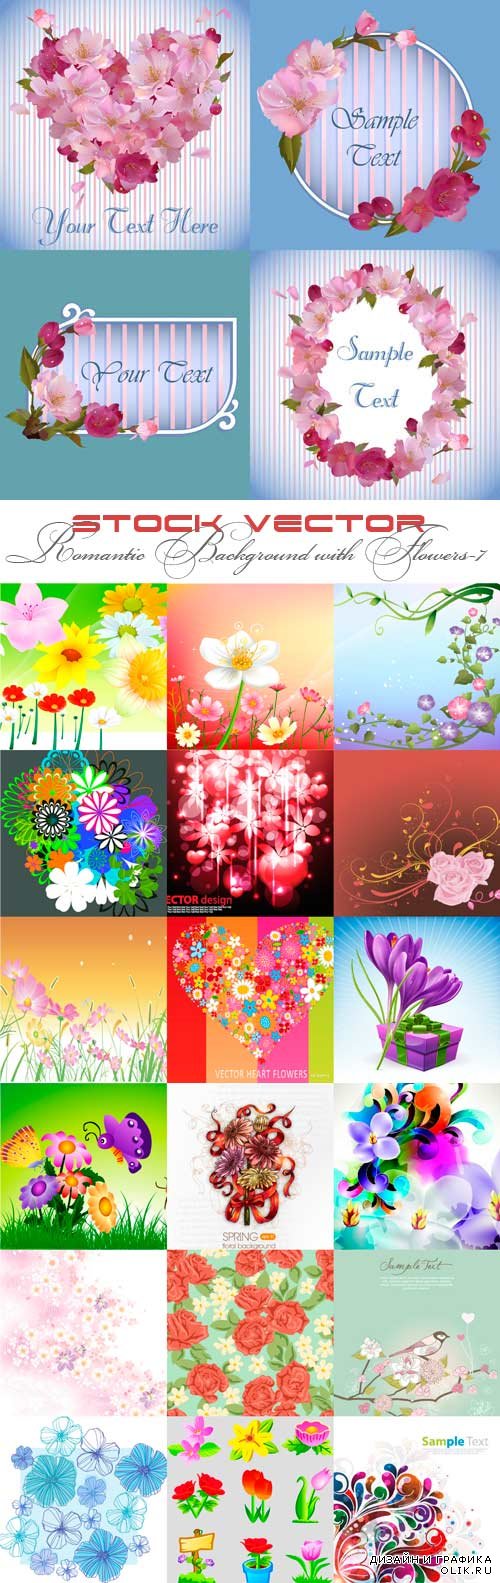 Romantic vector background with flowers-7